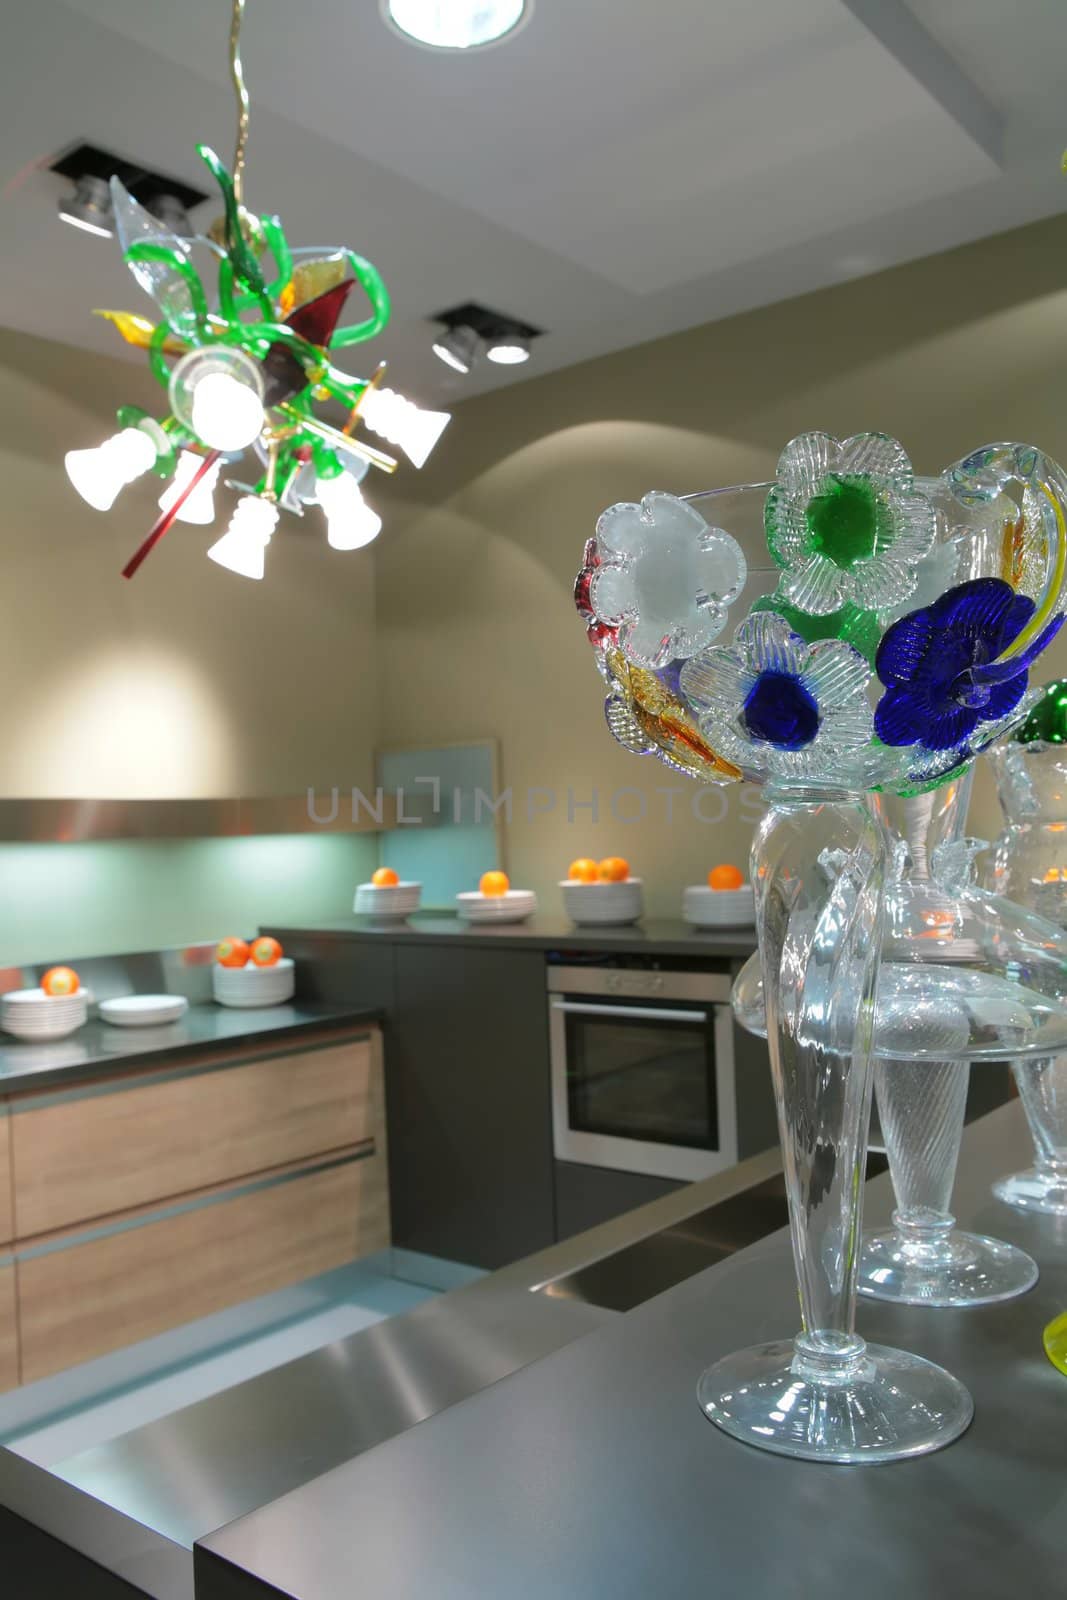 glass vase with graceful flowers in interior of the kitchens with oranges and beautiful chandelier